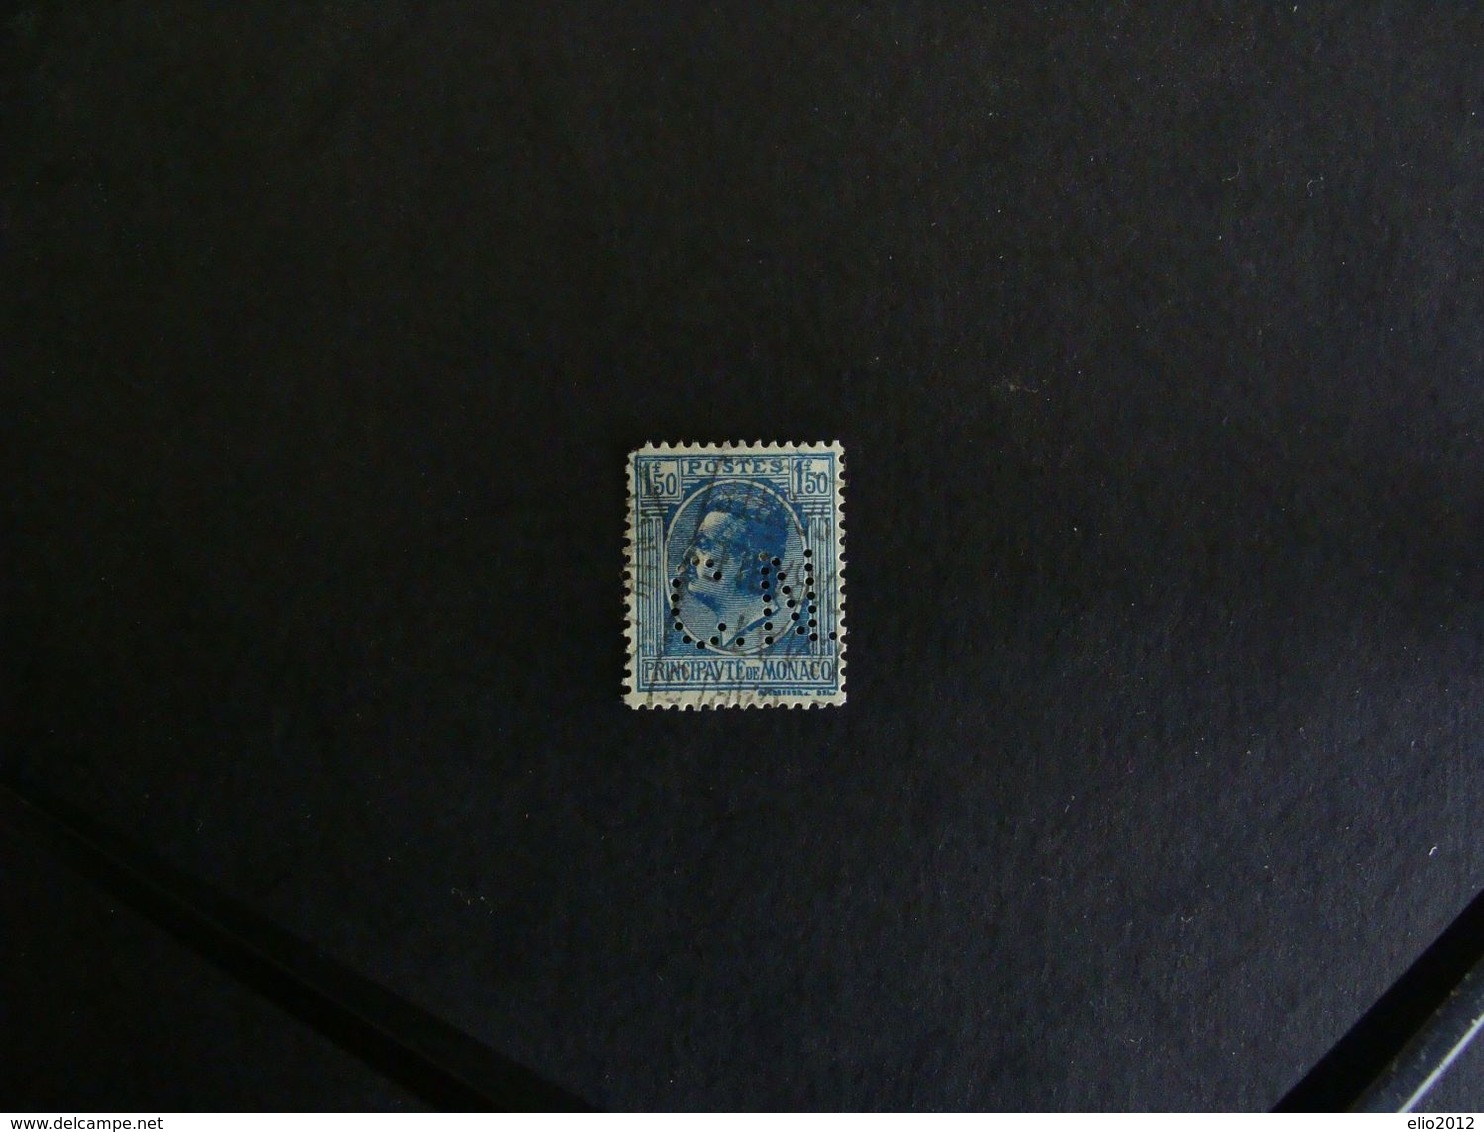 Perfin-Monaco 1924-33 - Francobollo,Stamps-perforè,perfins,perforated - Gebraucht